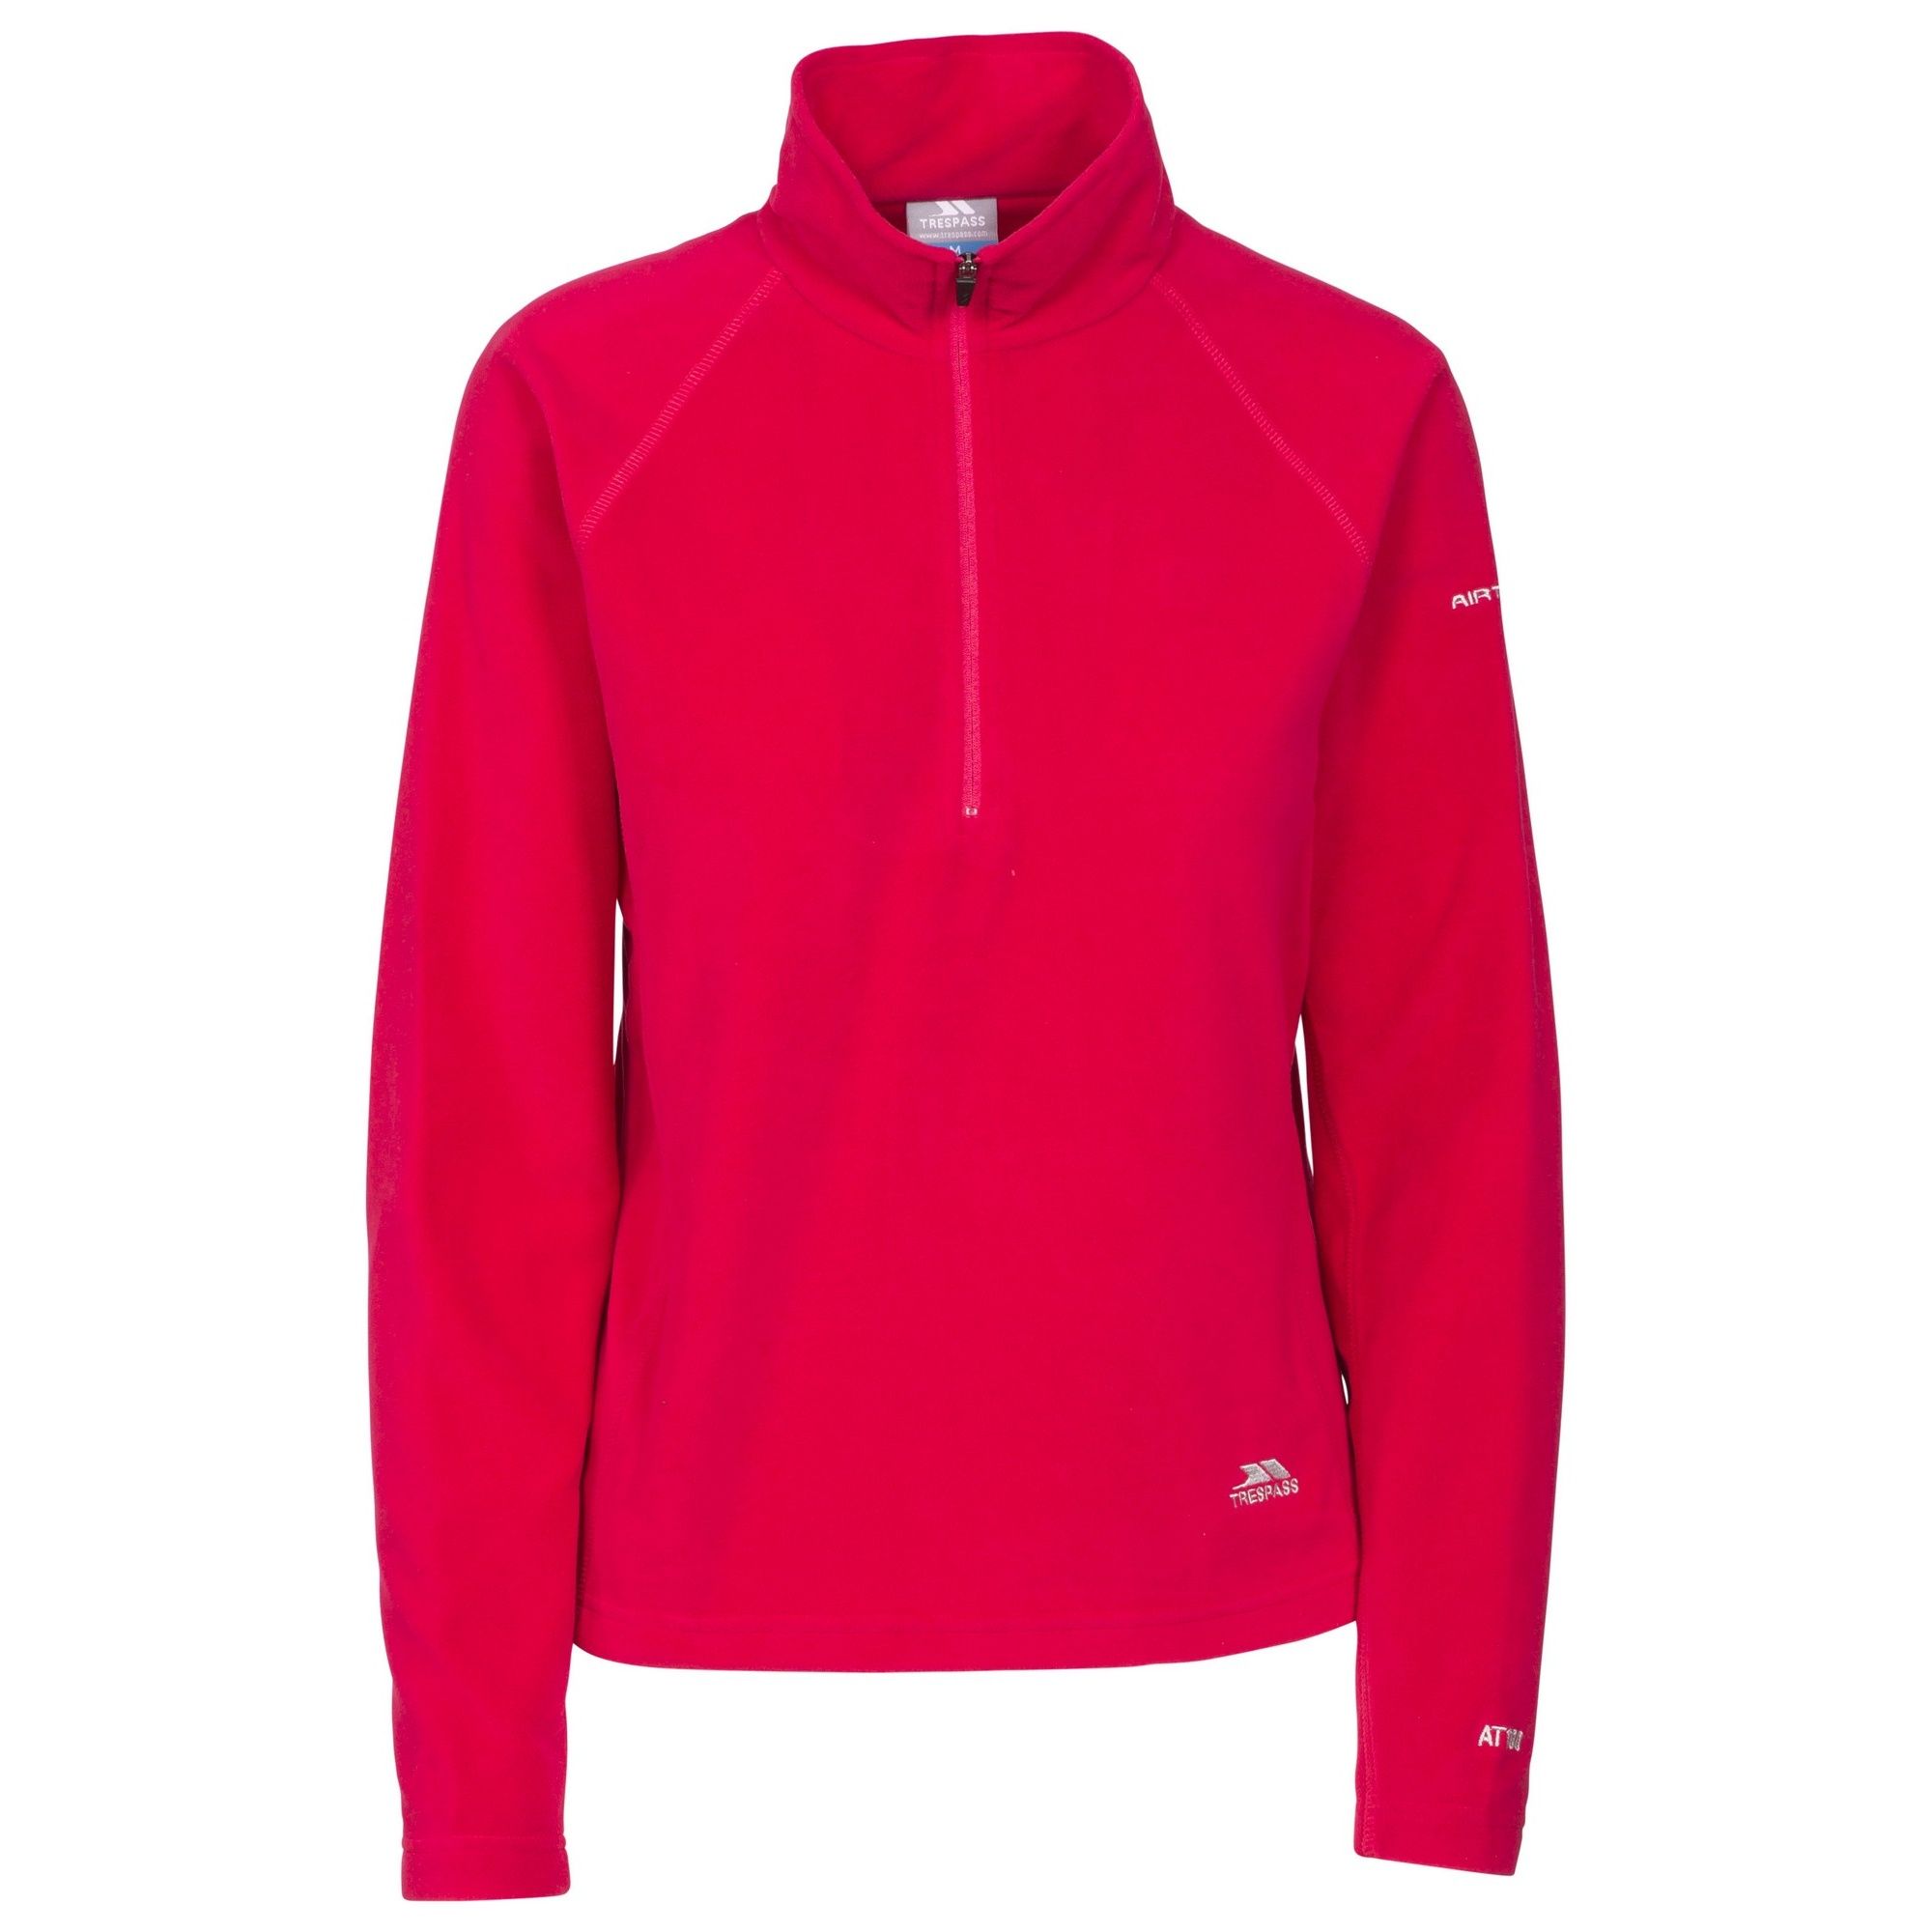 Ladies long sleeve fleece top. 130gsm Airtrap fleece build to trap and hold onto body heat. 1/2 zip neck. 100% Polyester. Trespass Womens Chest Sizing (approx): XS/8 - 32in/81cm, S/10 - 34in/86cm, M/12 - 36in/91.4cm, L/14 - 38in/96.5cm, XL/16 - 40in/101.5cm, XXL/18 - 42in/106.5cm.